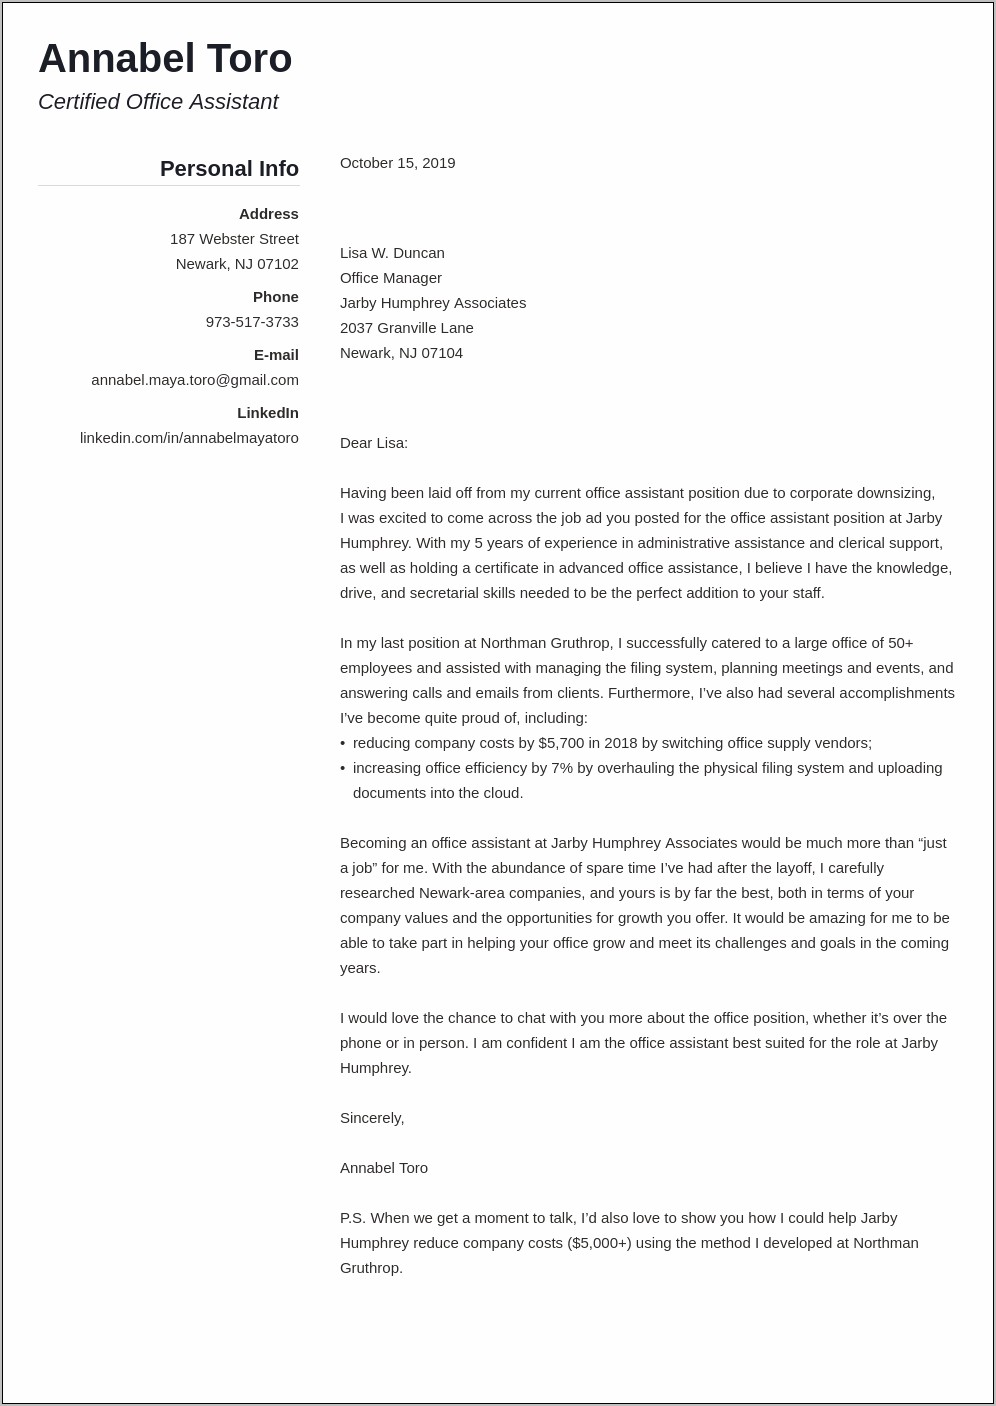 Email Resume Cover Letter In Body